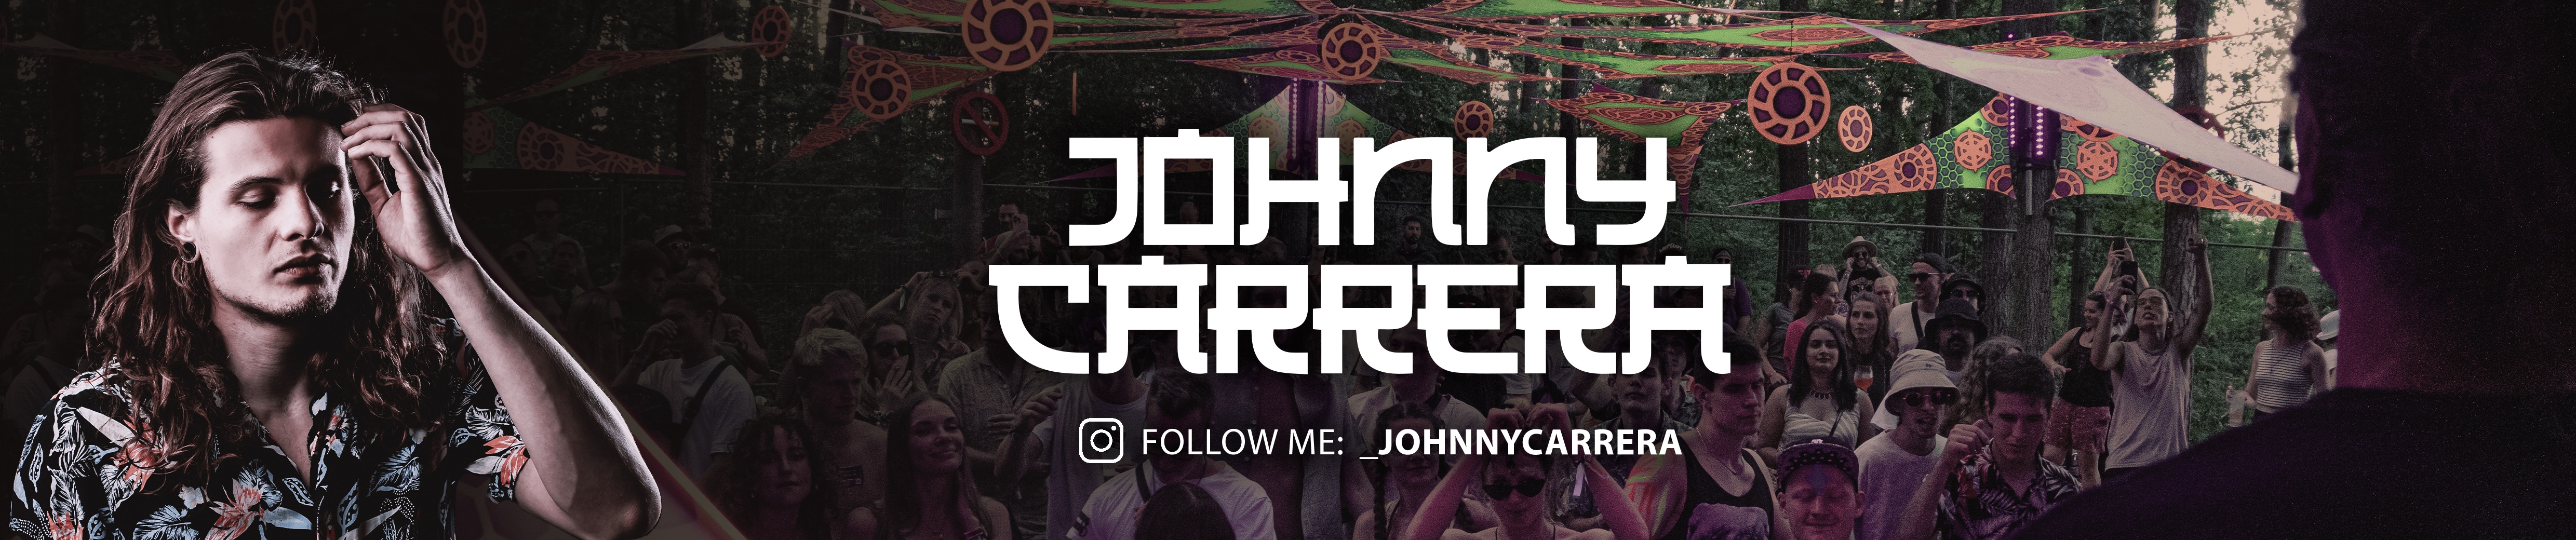 Stream Johnny Carrera music | Listen to songs, albums, playlists for free  on SoundCloud